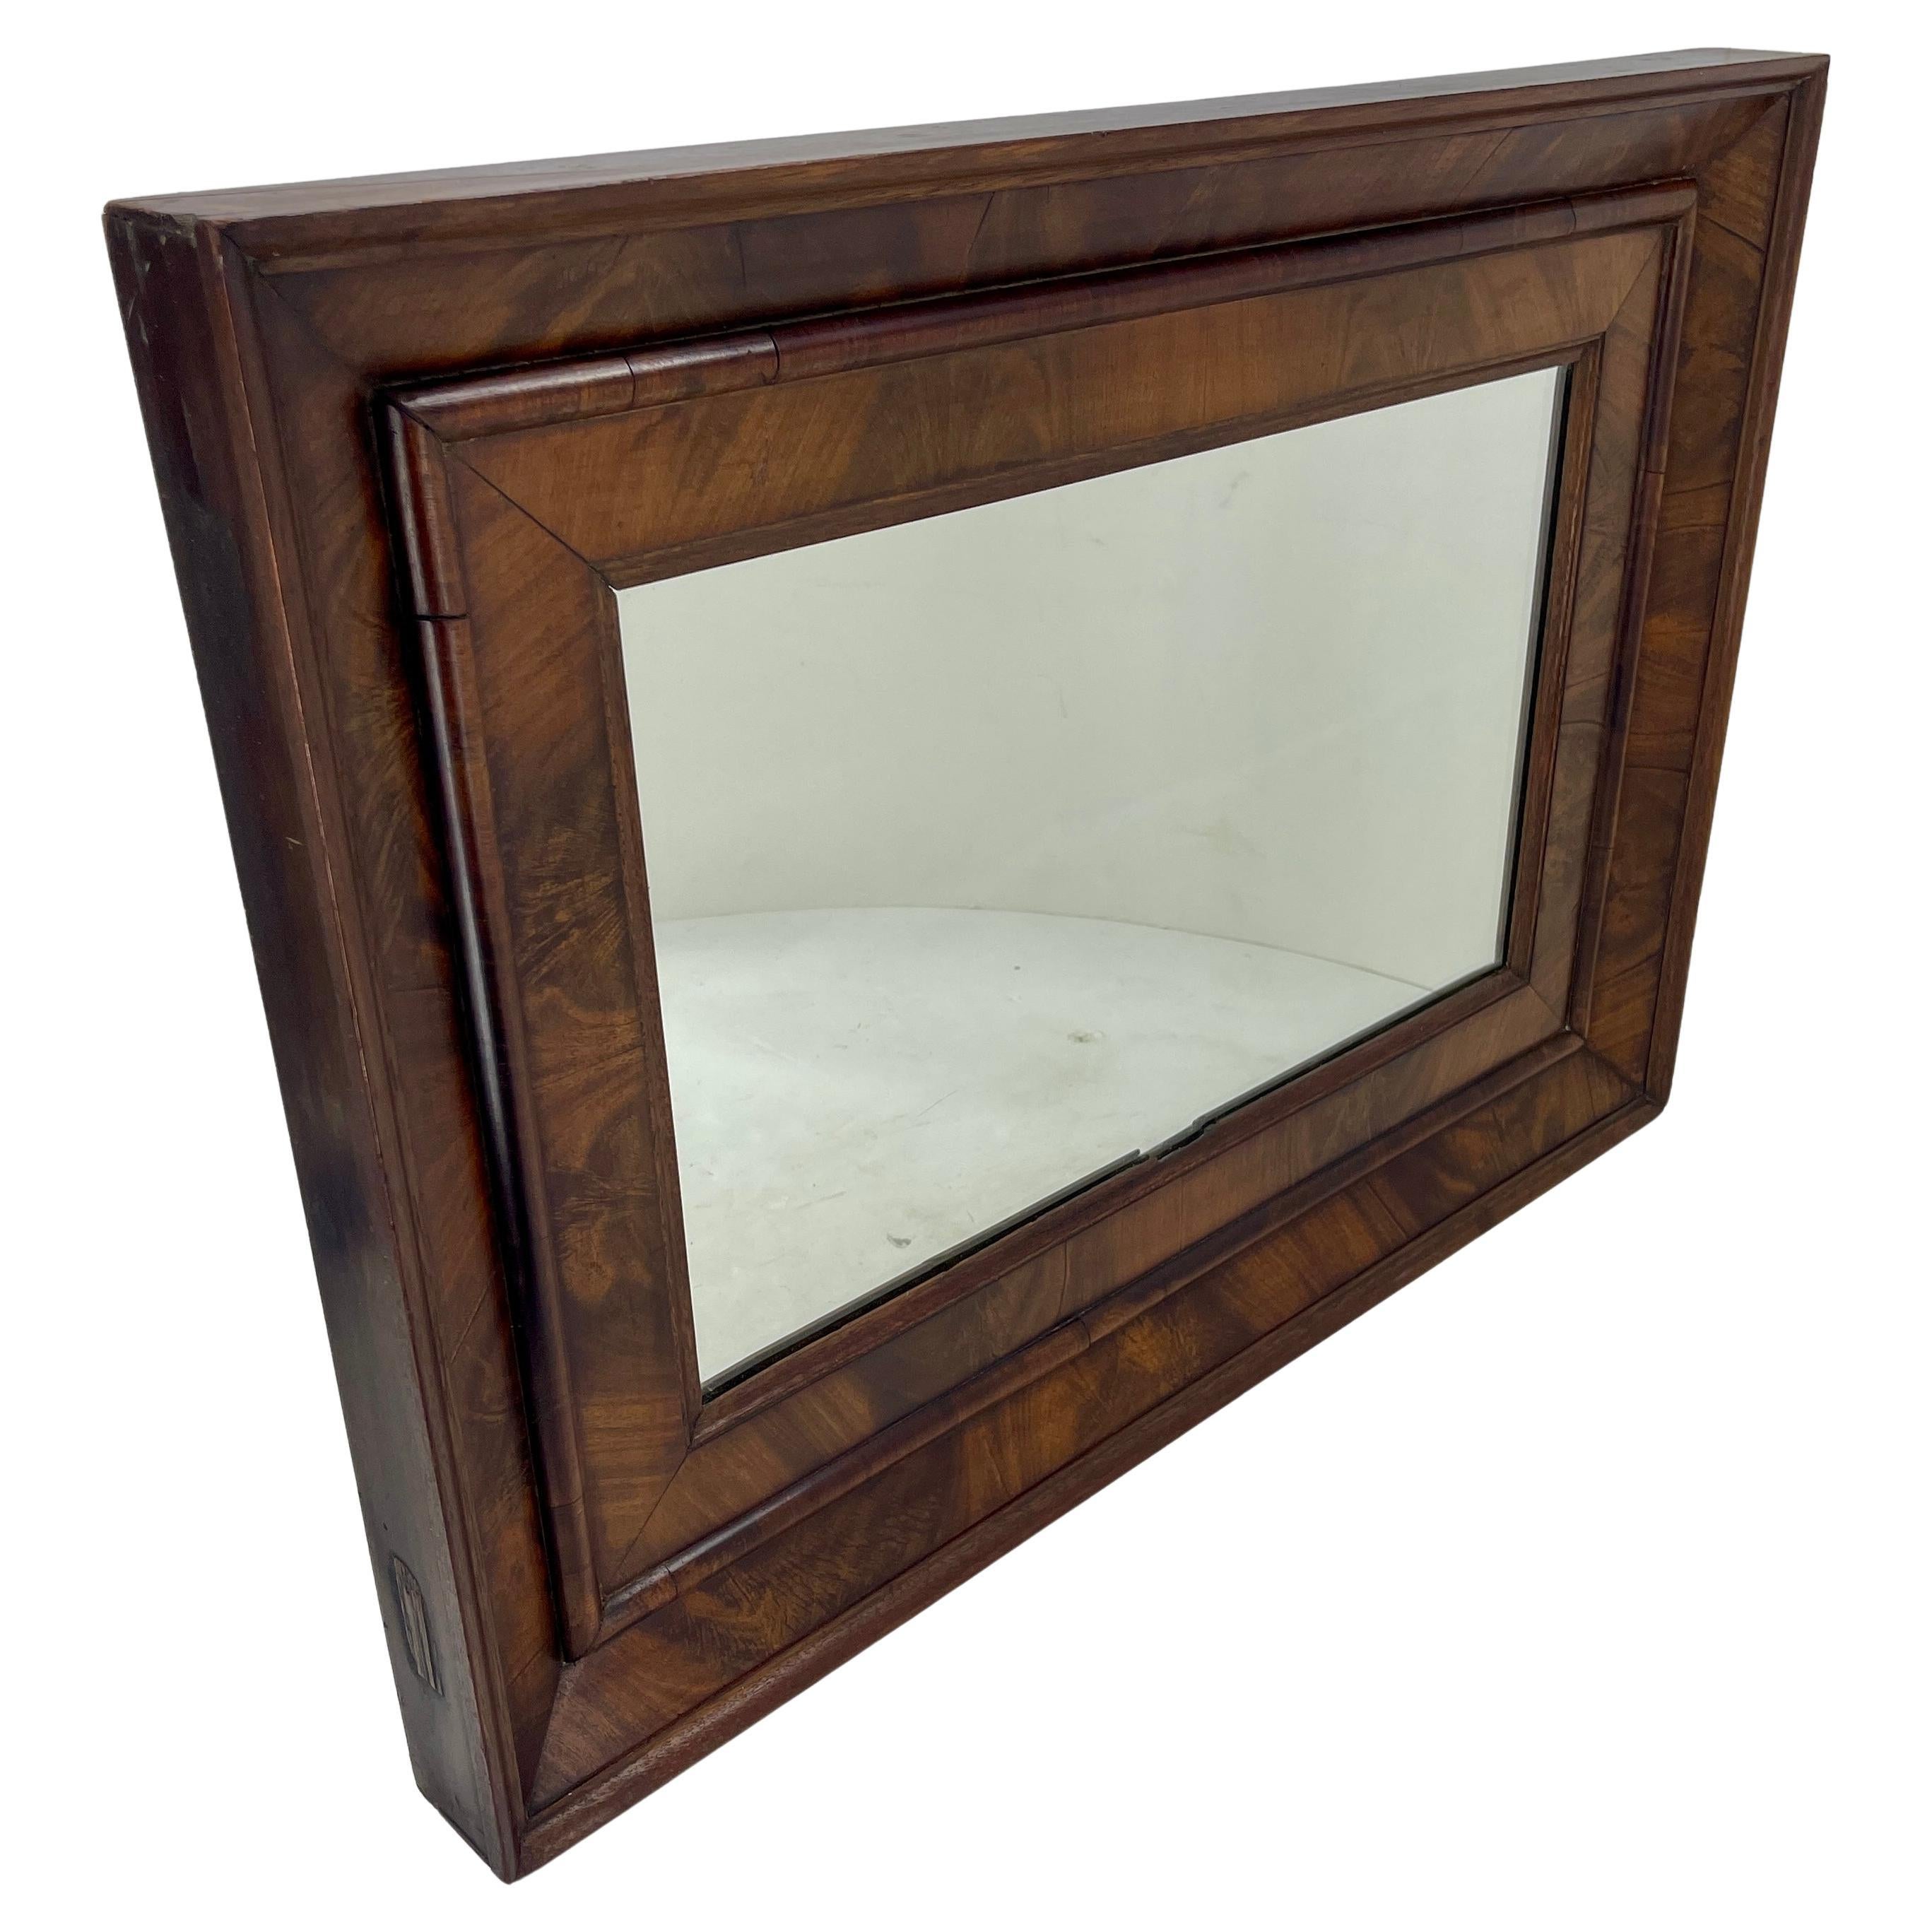 Antique American empire flame mahogany rectangular wall mirror.
This mirror will hang horizontally or vertically.
The Ogee mahogany veneered is a particular charm worth noting. This mirror presents itself as sturdy, heavy and charmingly radiant.